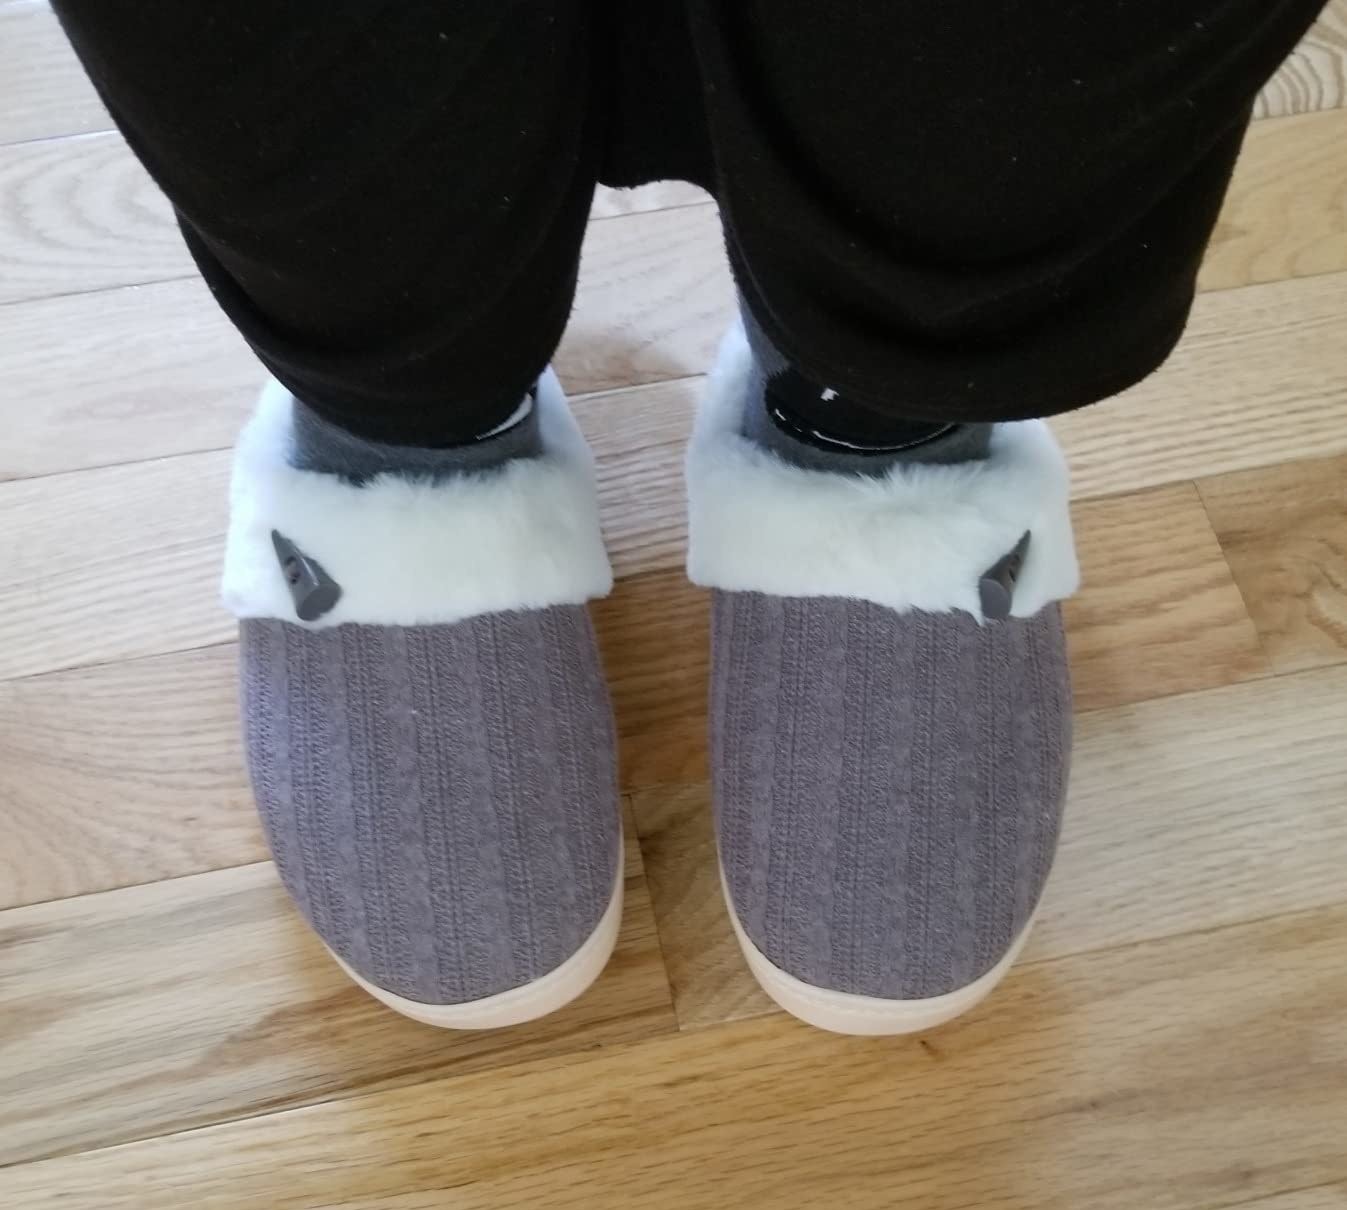 Reviewer wearing the grey slippers